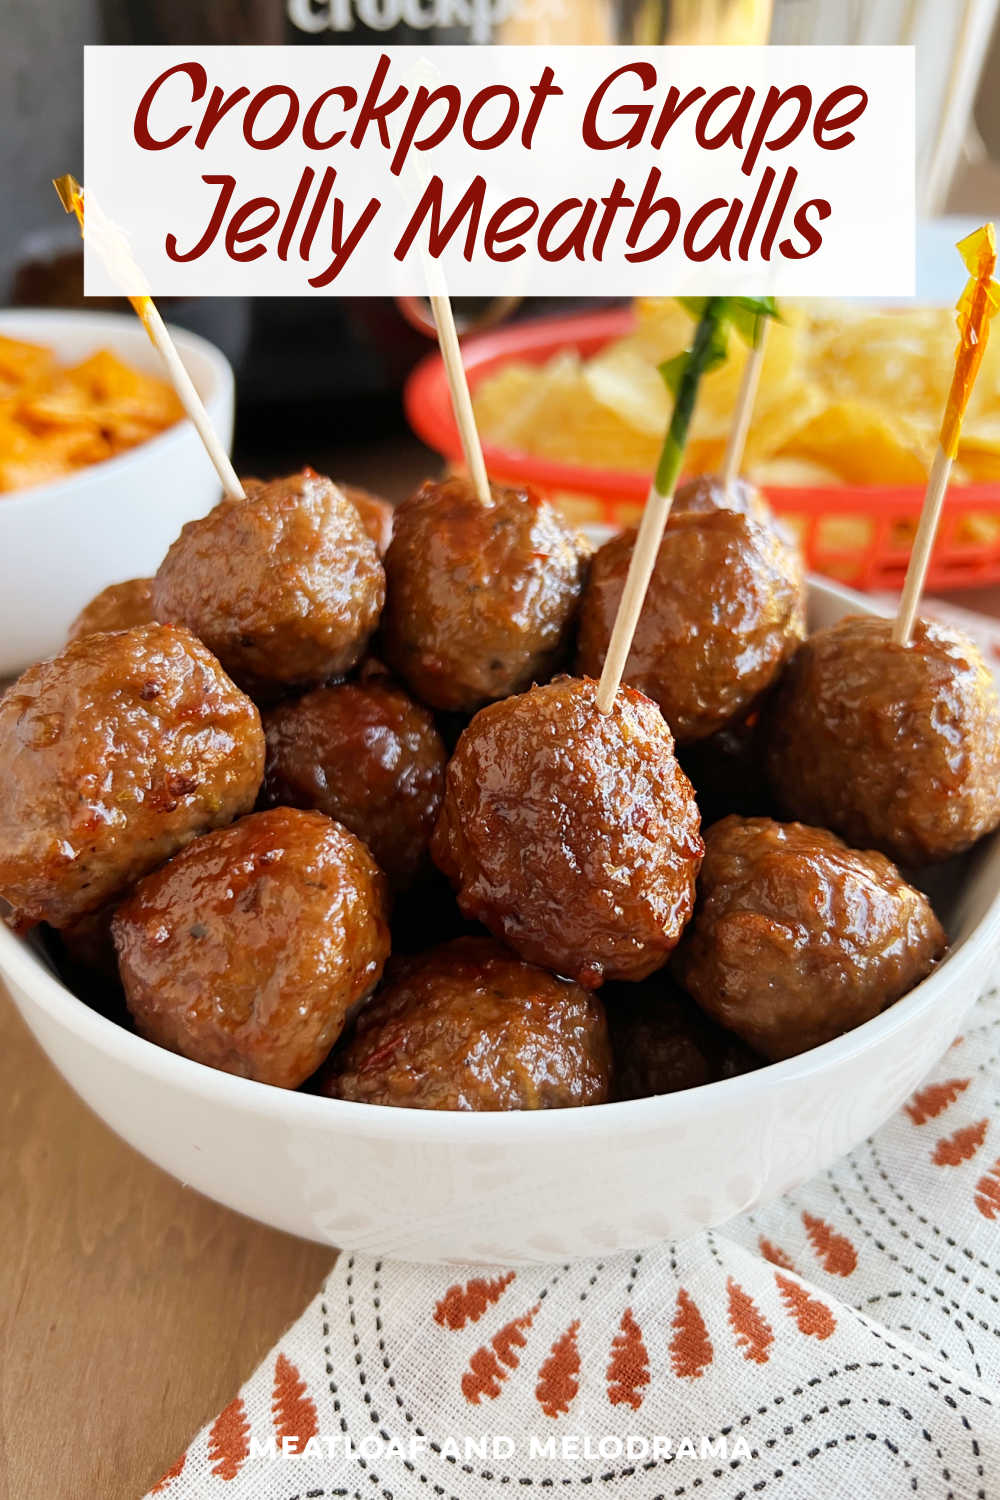 Crockpot Grape Jelly Meatballs is an easy appetizer with frozen meatballs, grape jelly and a bottle of Heinz chili sauce made in the slow cooker. This easy recipe is the perfect appetizer for game day and parties! via @meamel